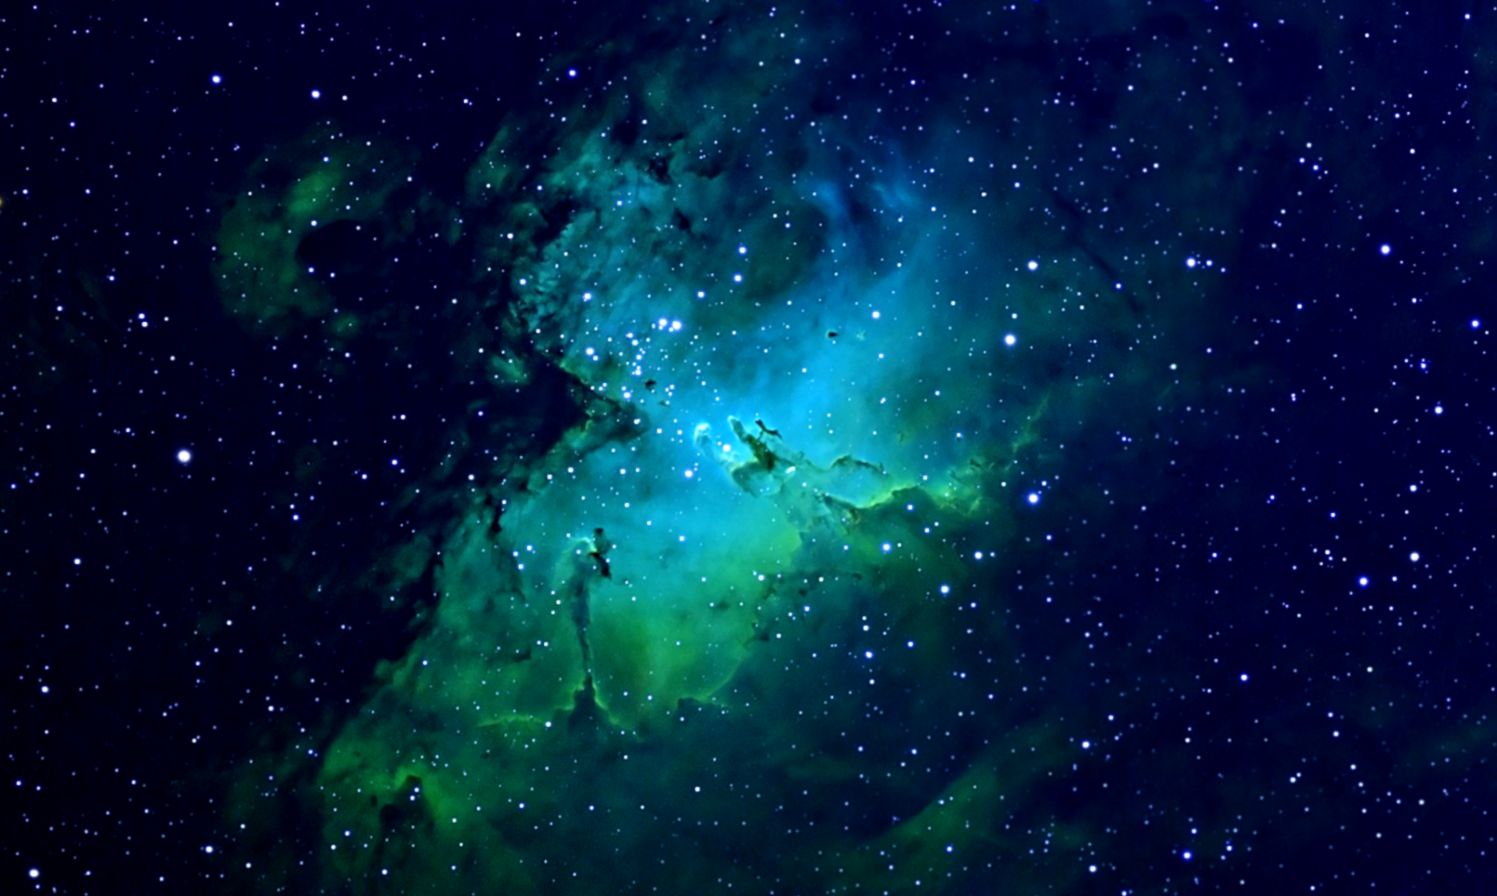 Star Sky Hd Wallpapers Starry Constellation Magazine - Blue And Green Galaxy Background - HD Wallpaper 